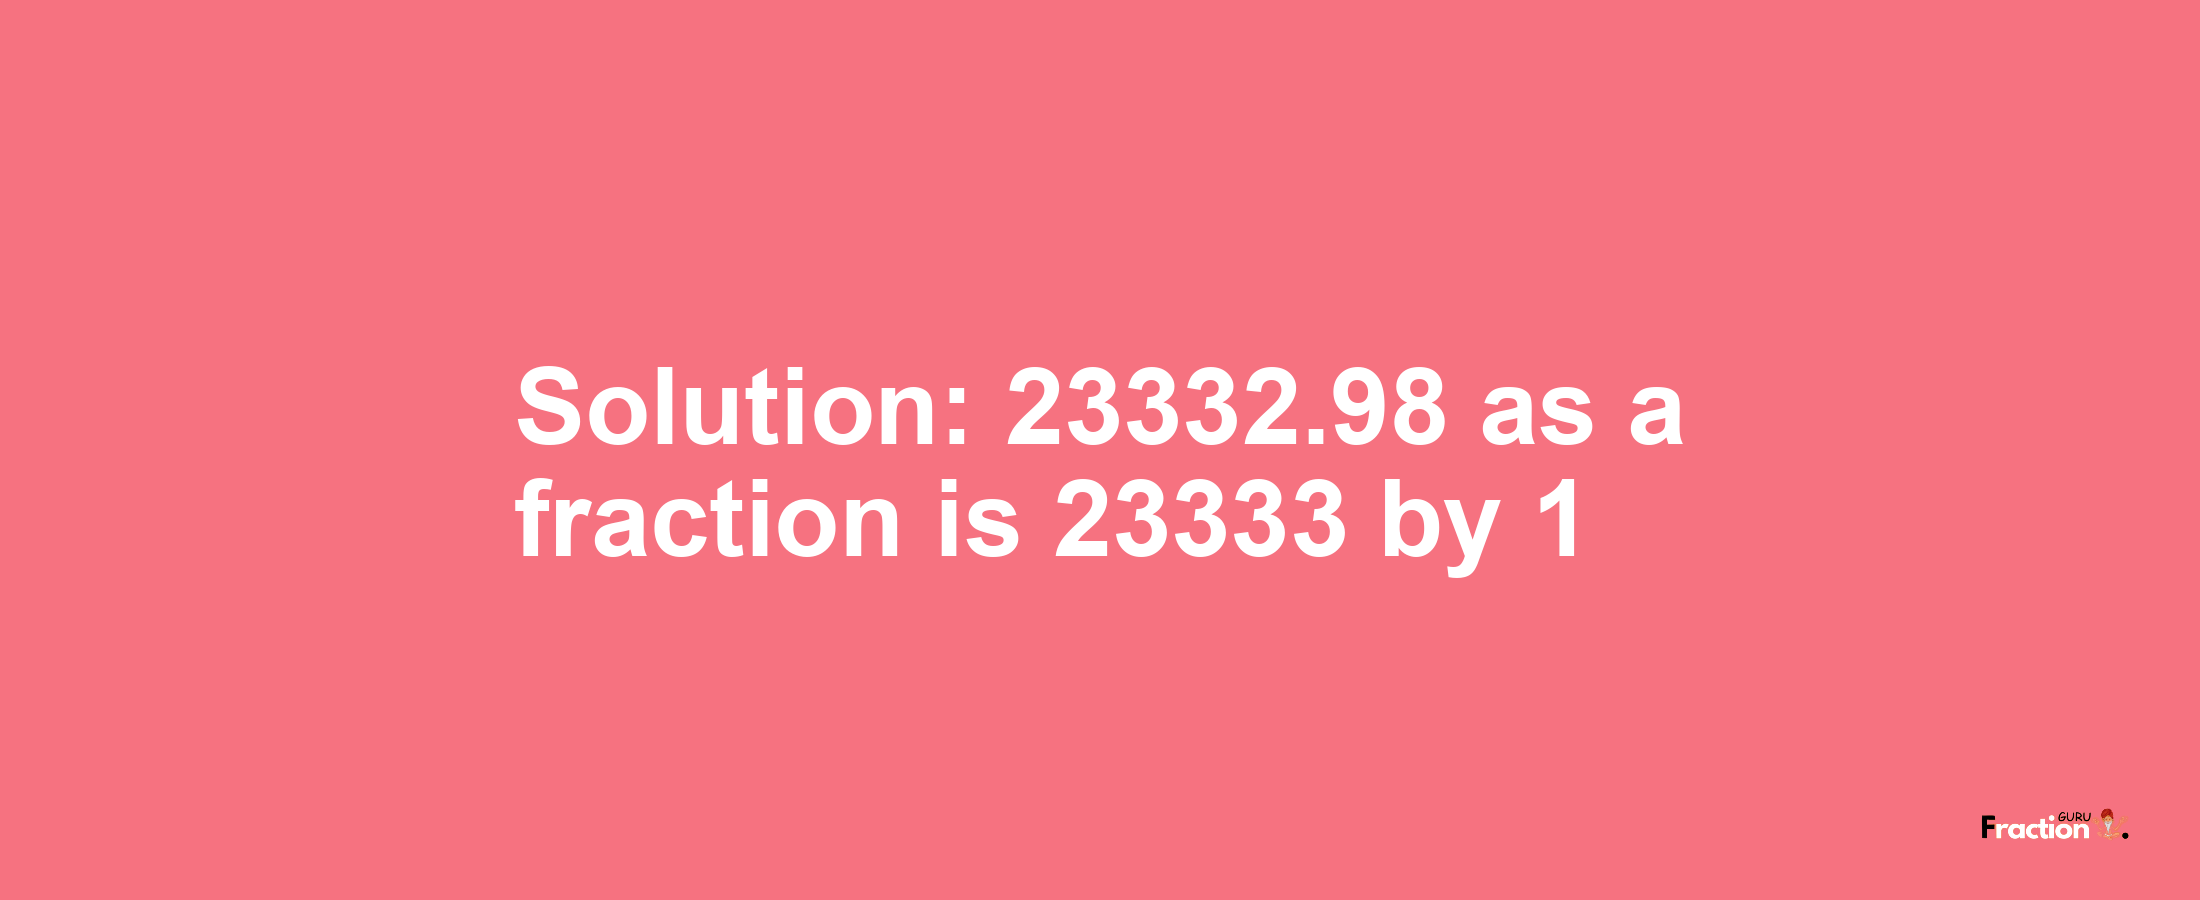 Solution:23332.98 as a fraction is 23333/1